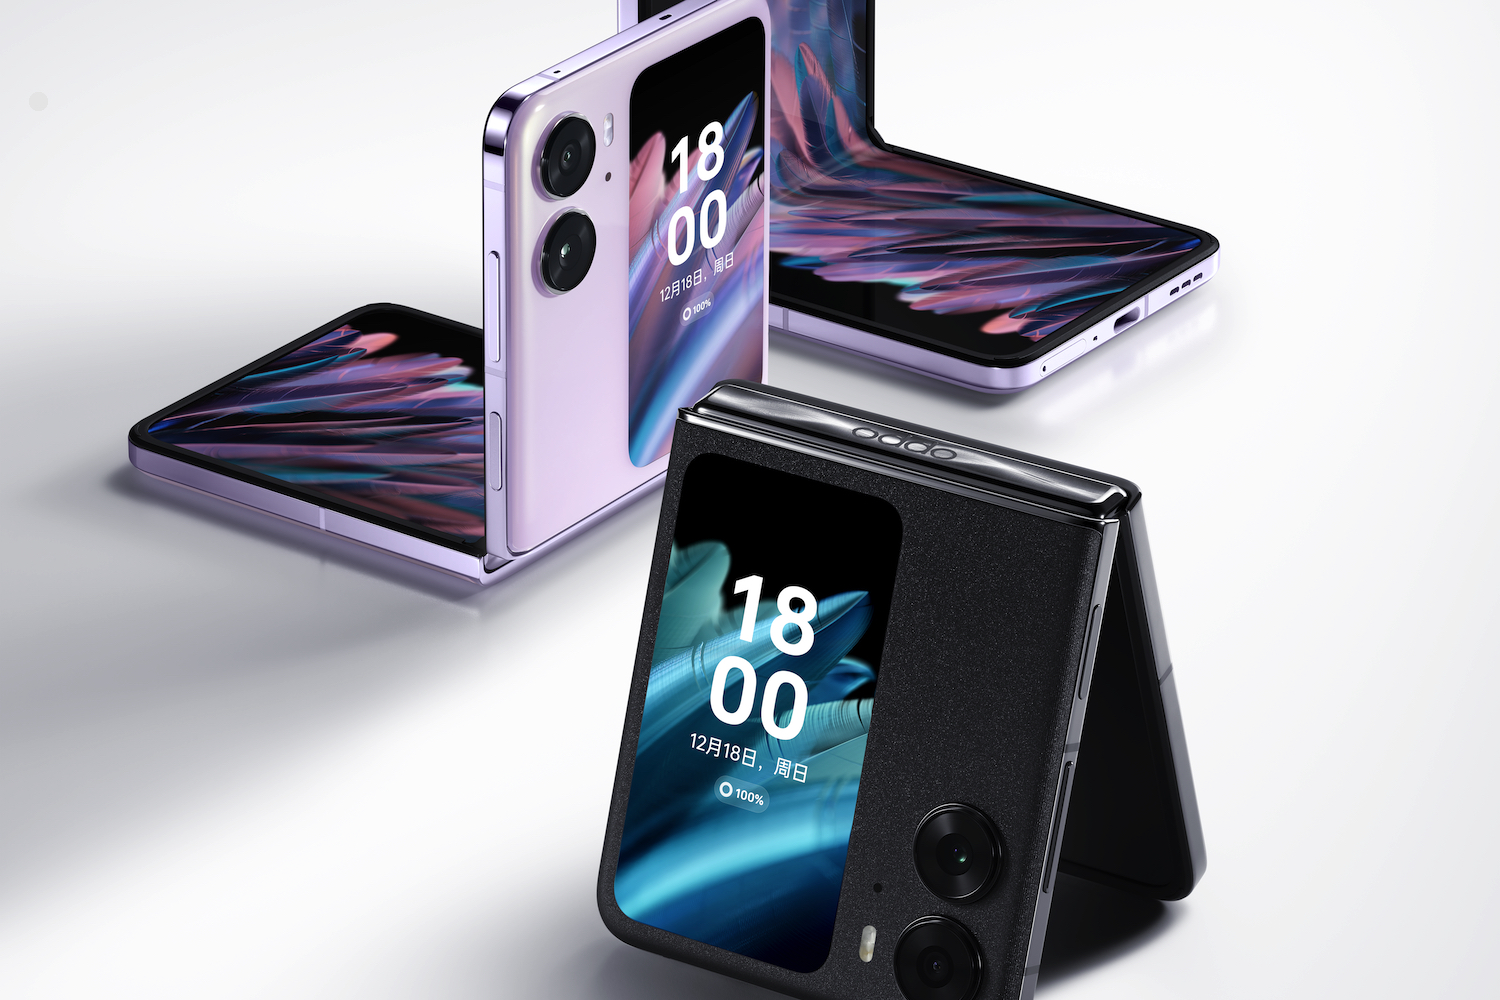 Oppo's foldable phones take on Samsung with a flip phone and a tablet